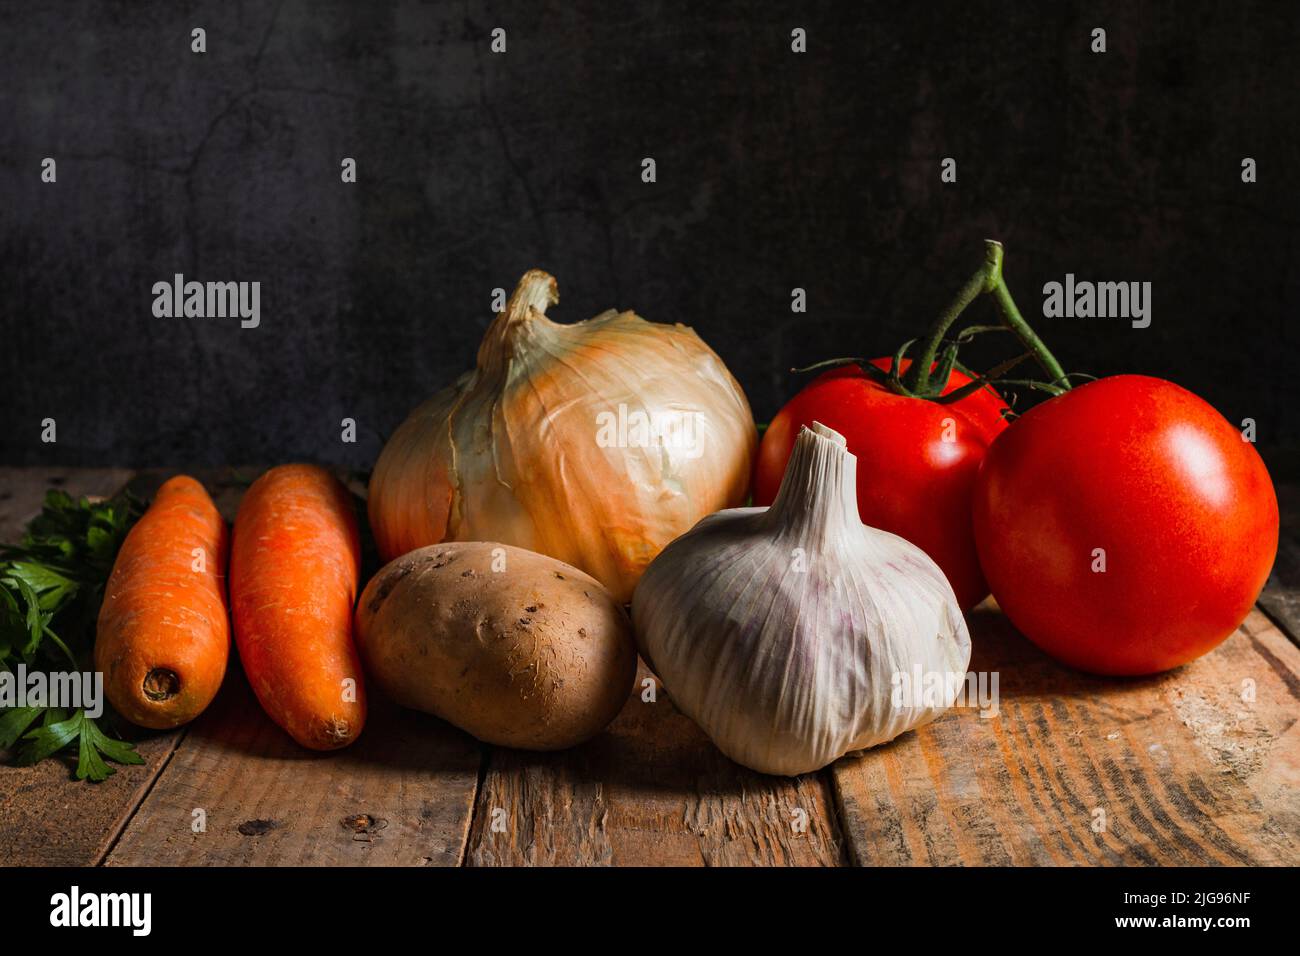 Still life on a rustic table of wooden planks on which there are carrots, tomatoes, garlic, onion, potato and parsley. In the background there is a wa Stock Photo